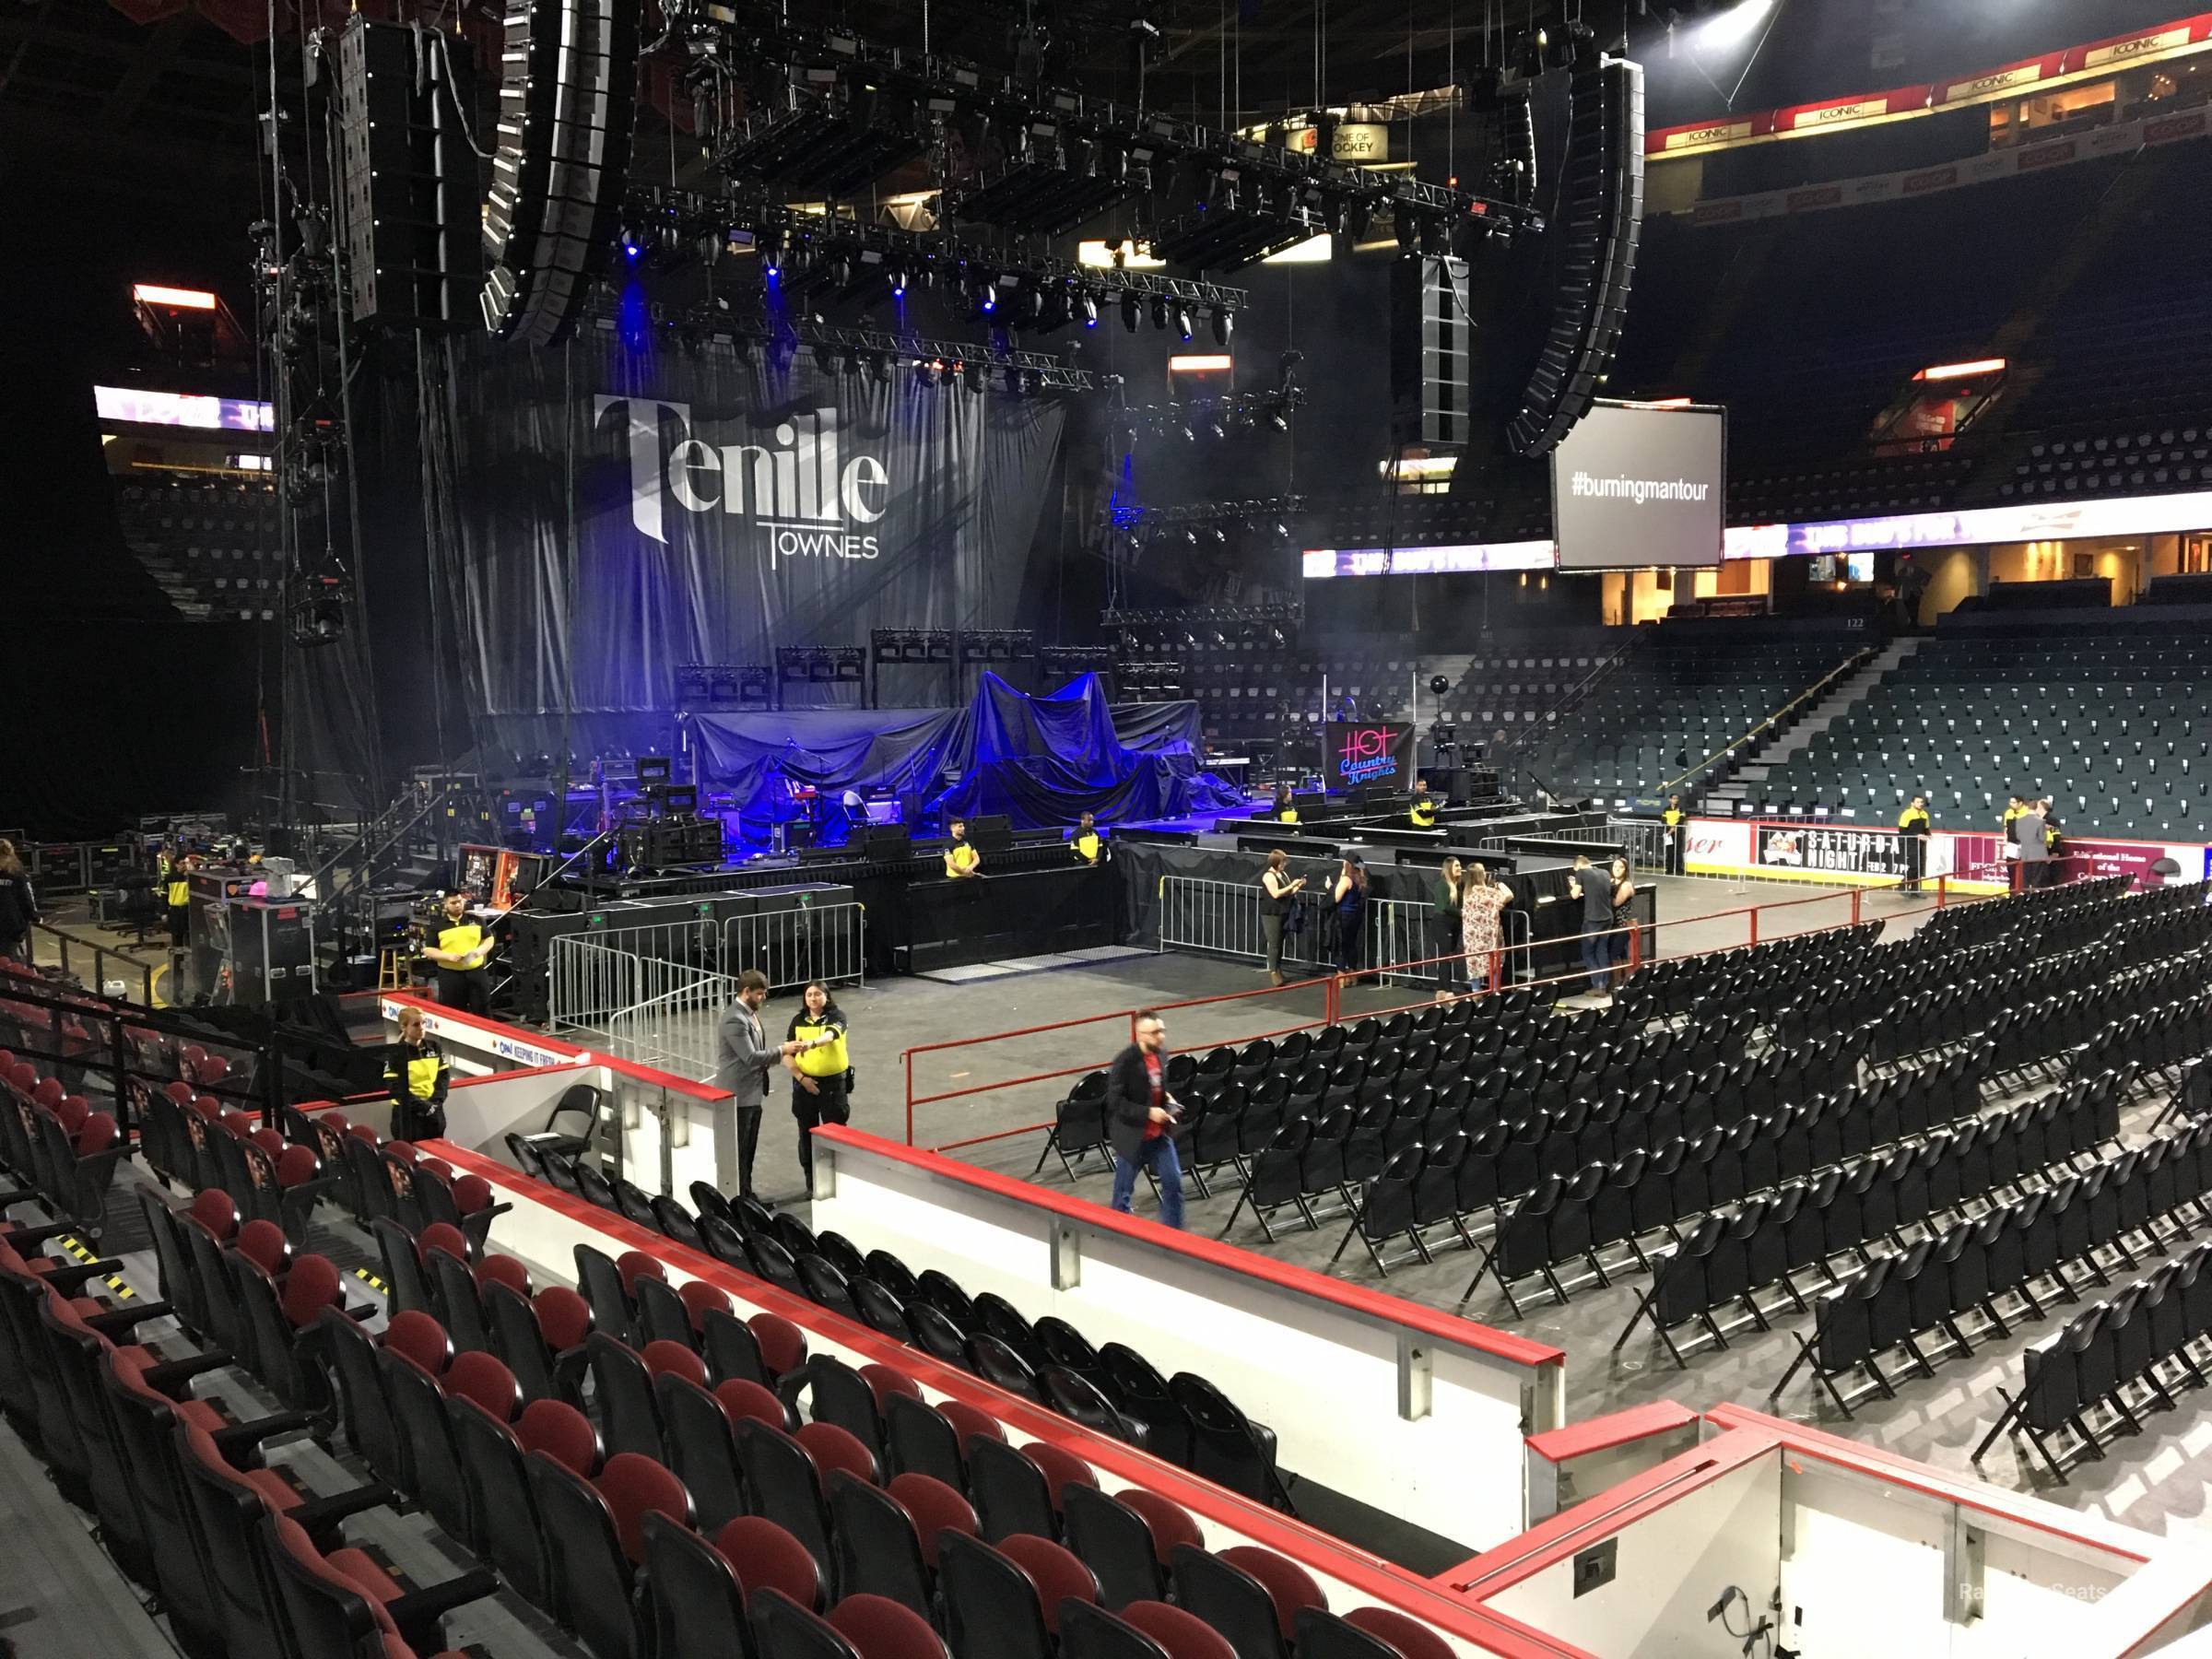 Section 109 at Scotiabank Saddledome for Concerts